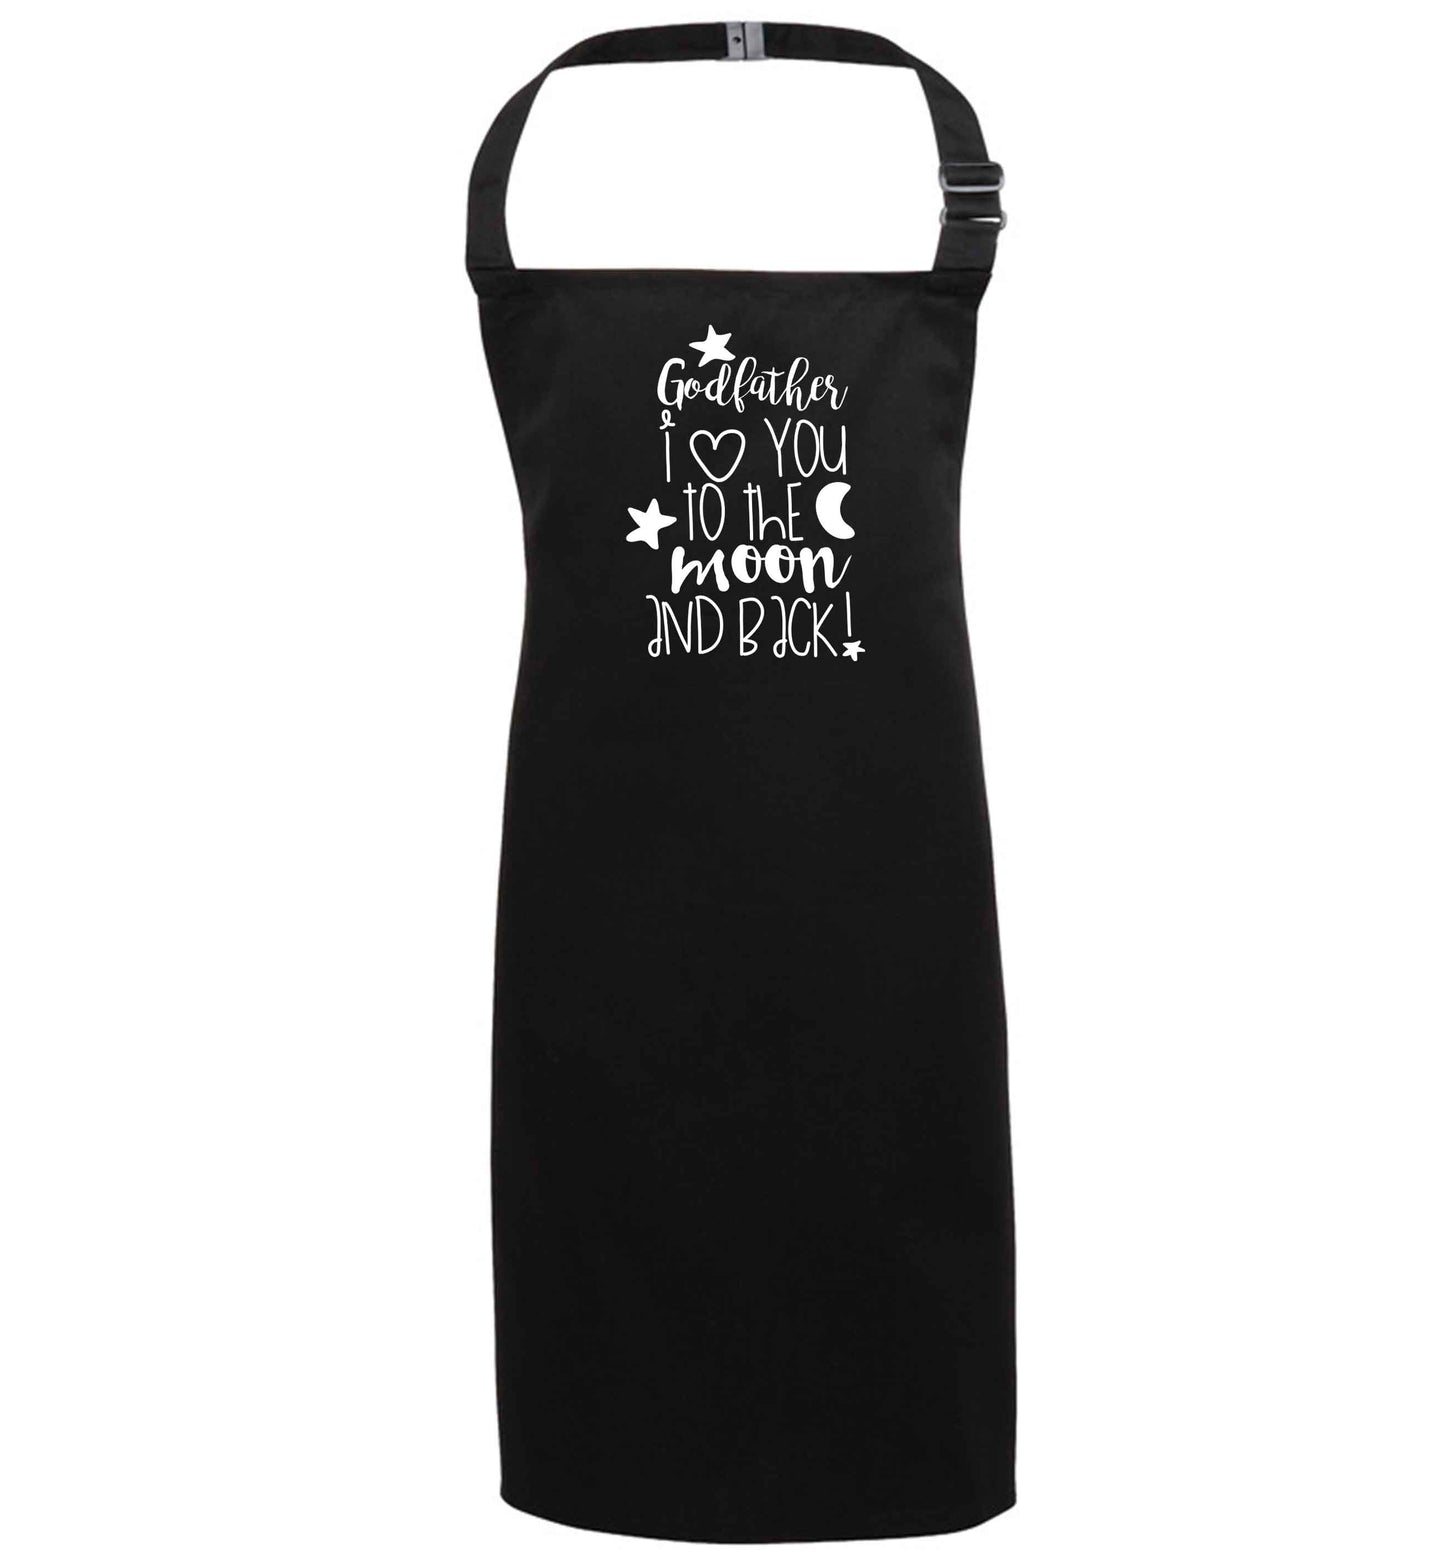 Godfather I love you to the moon and back black apron 7-10 years